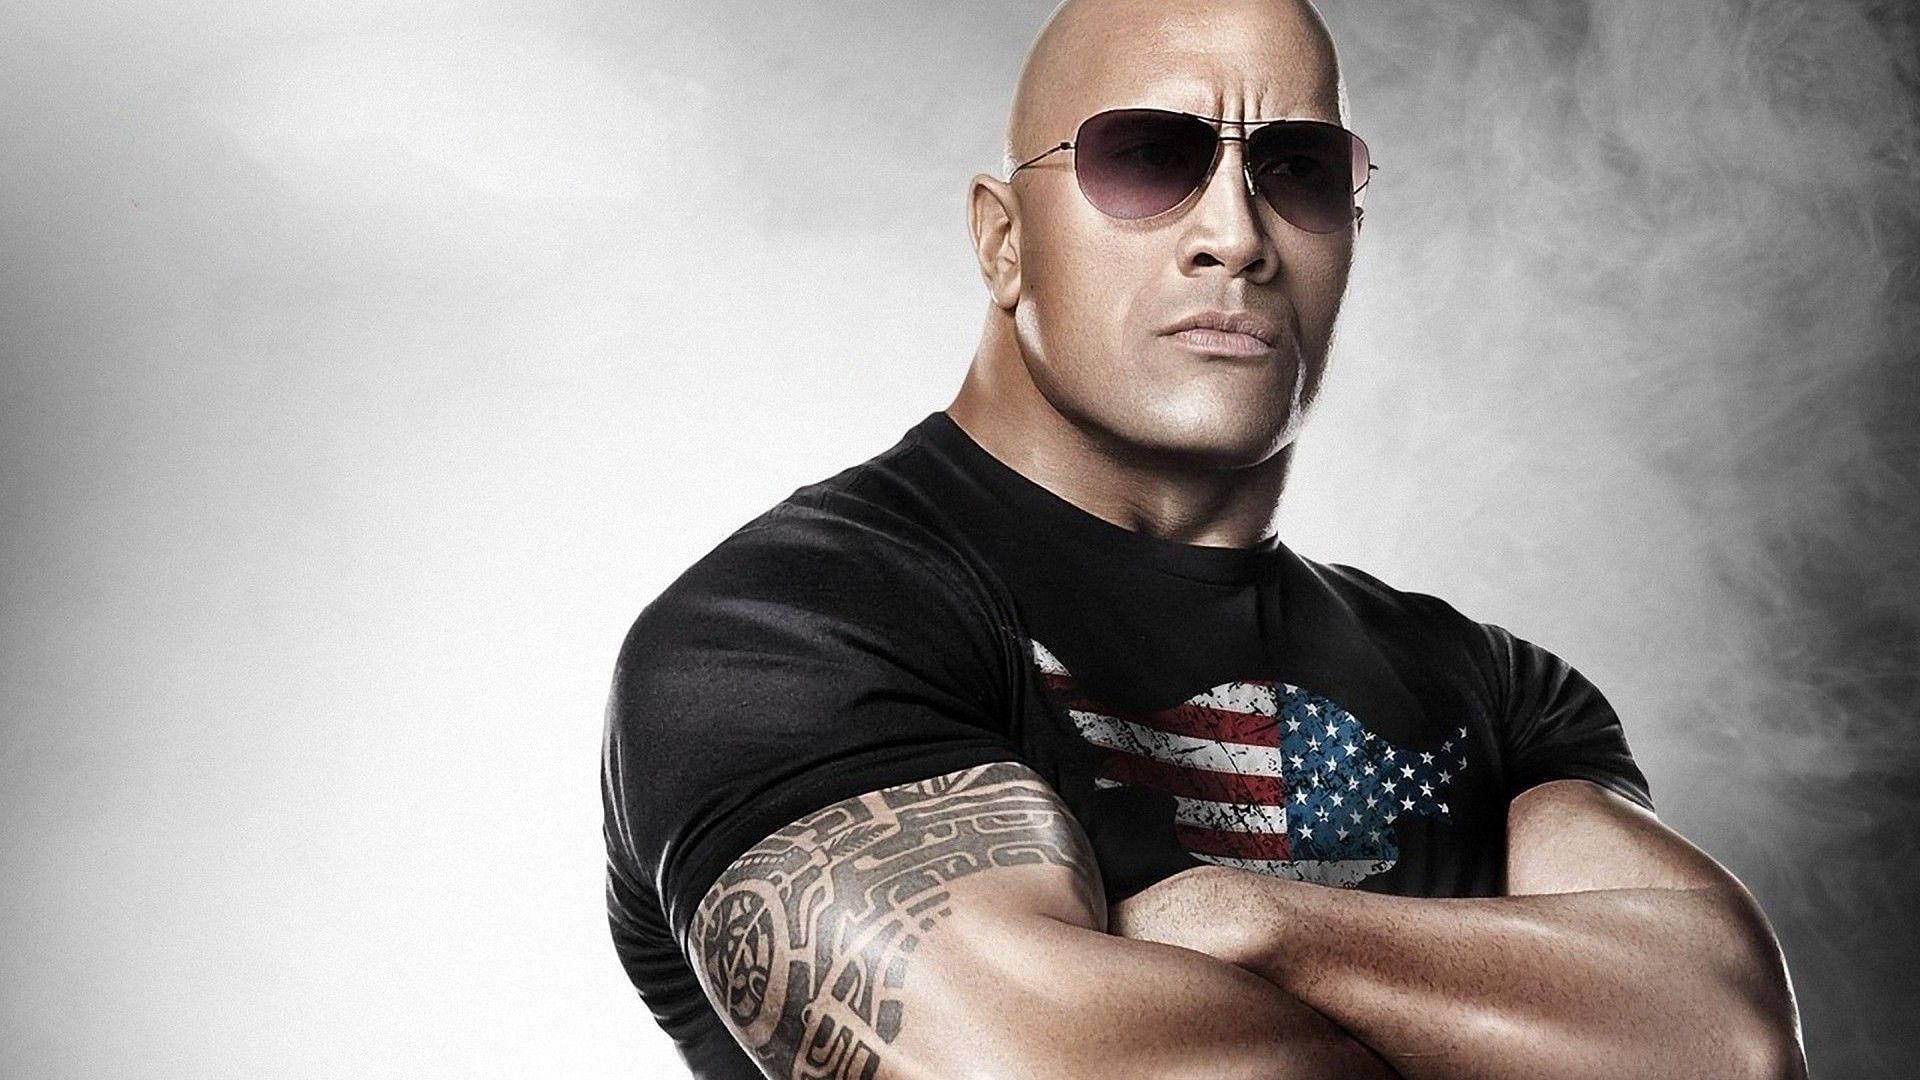 Dwayne Johnson&#039;s Workout and Diet revealed (Image via wallpaperaccess)